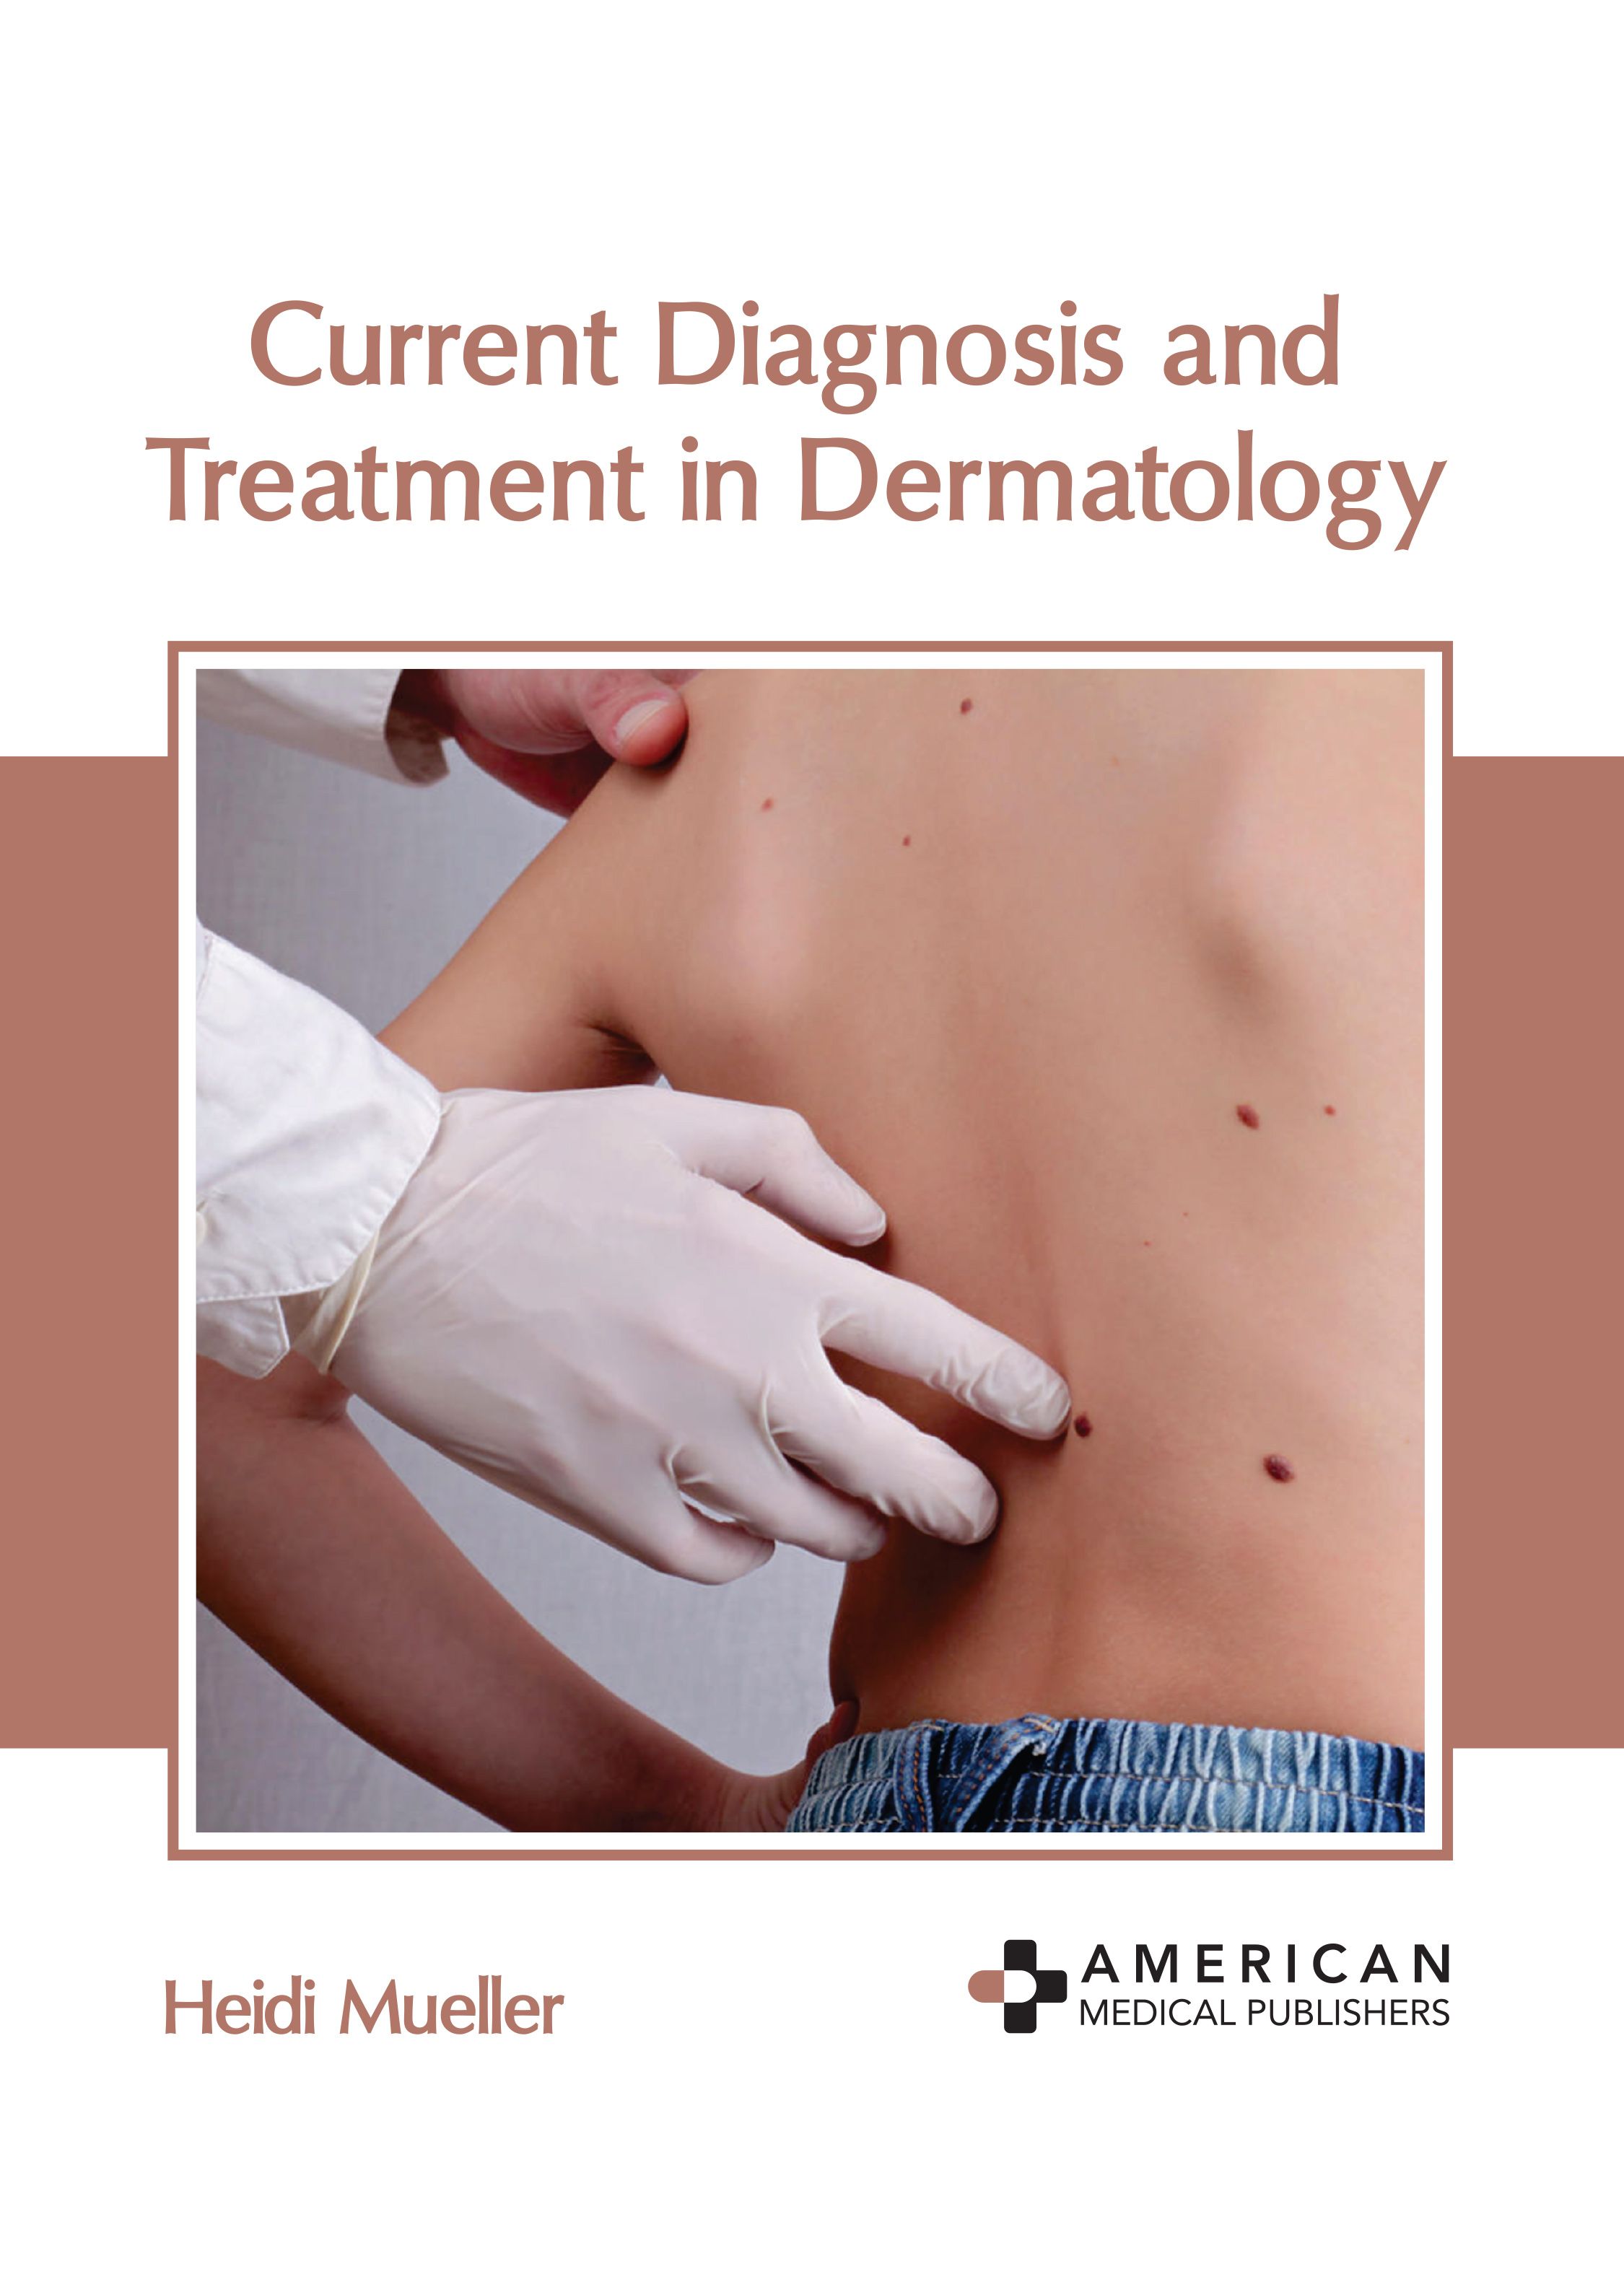 CURRENT DIAGNOSIS AND TREATMENT IN DERMATOLOGY